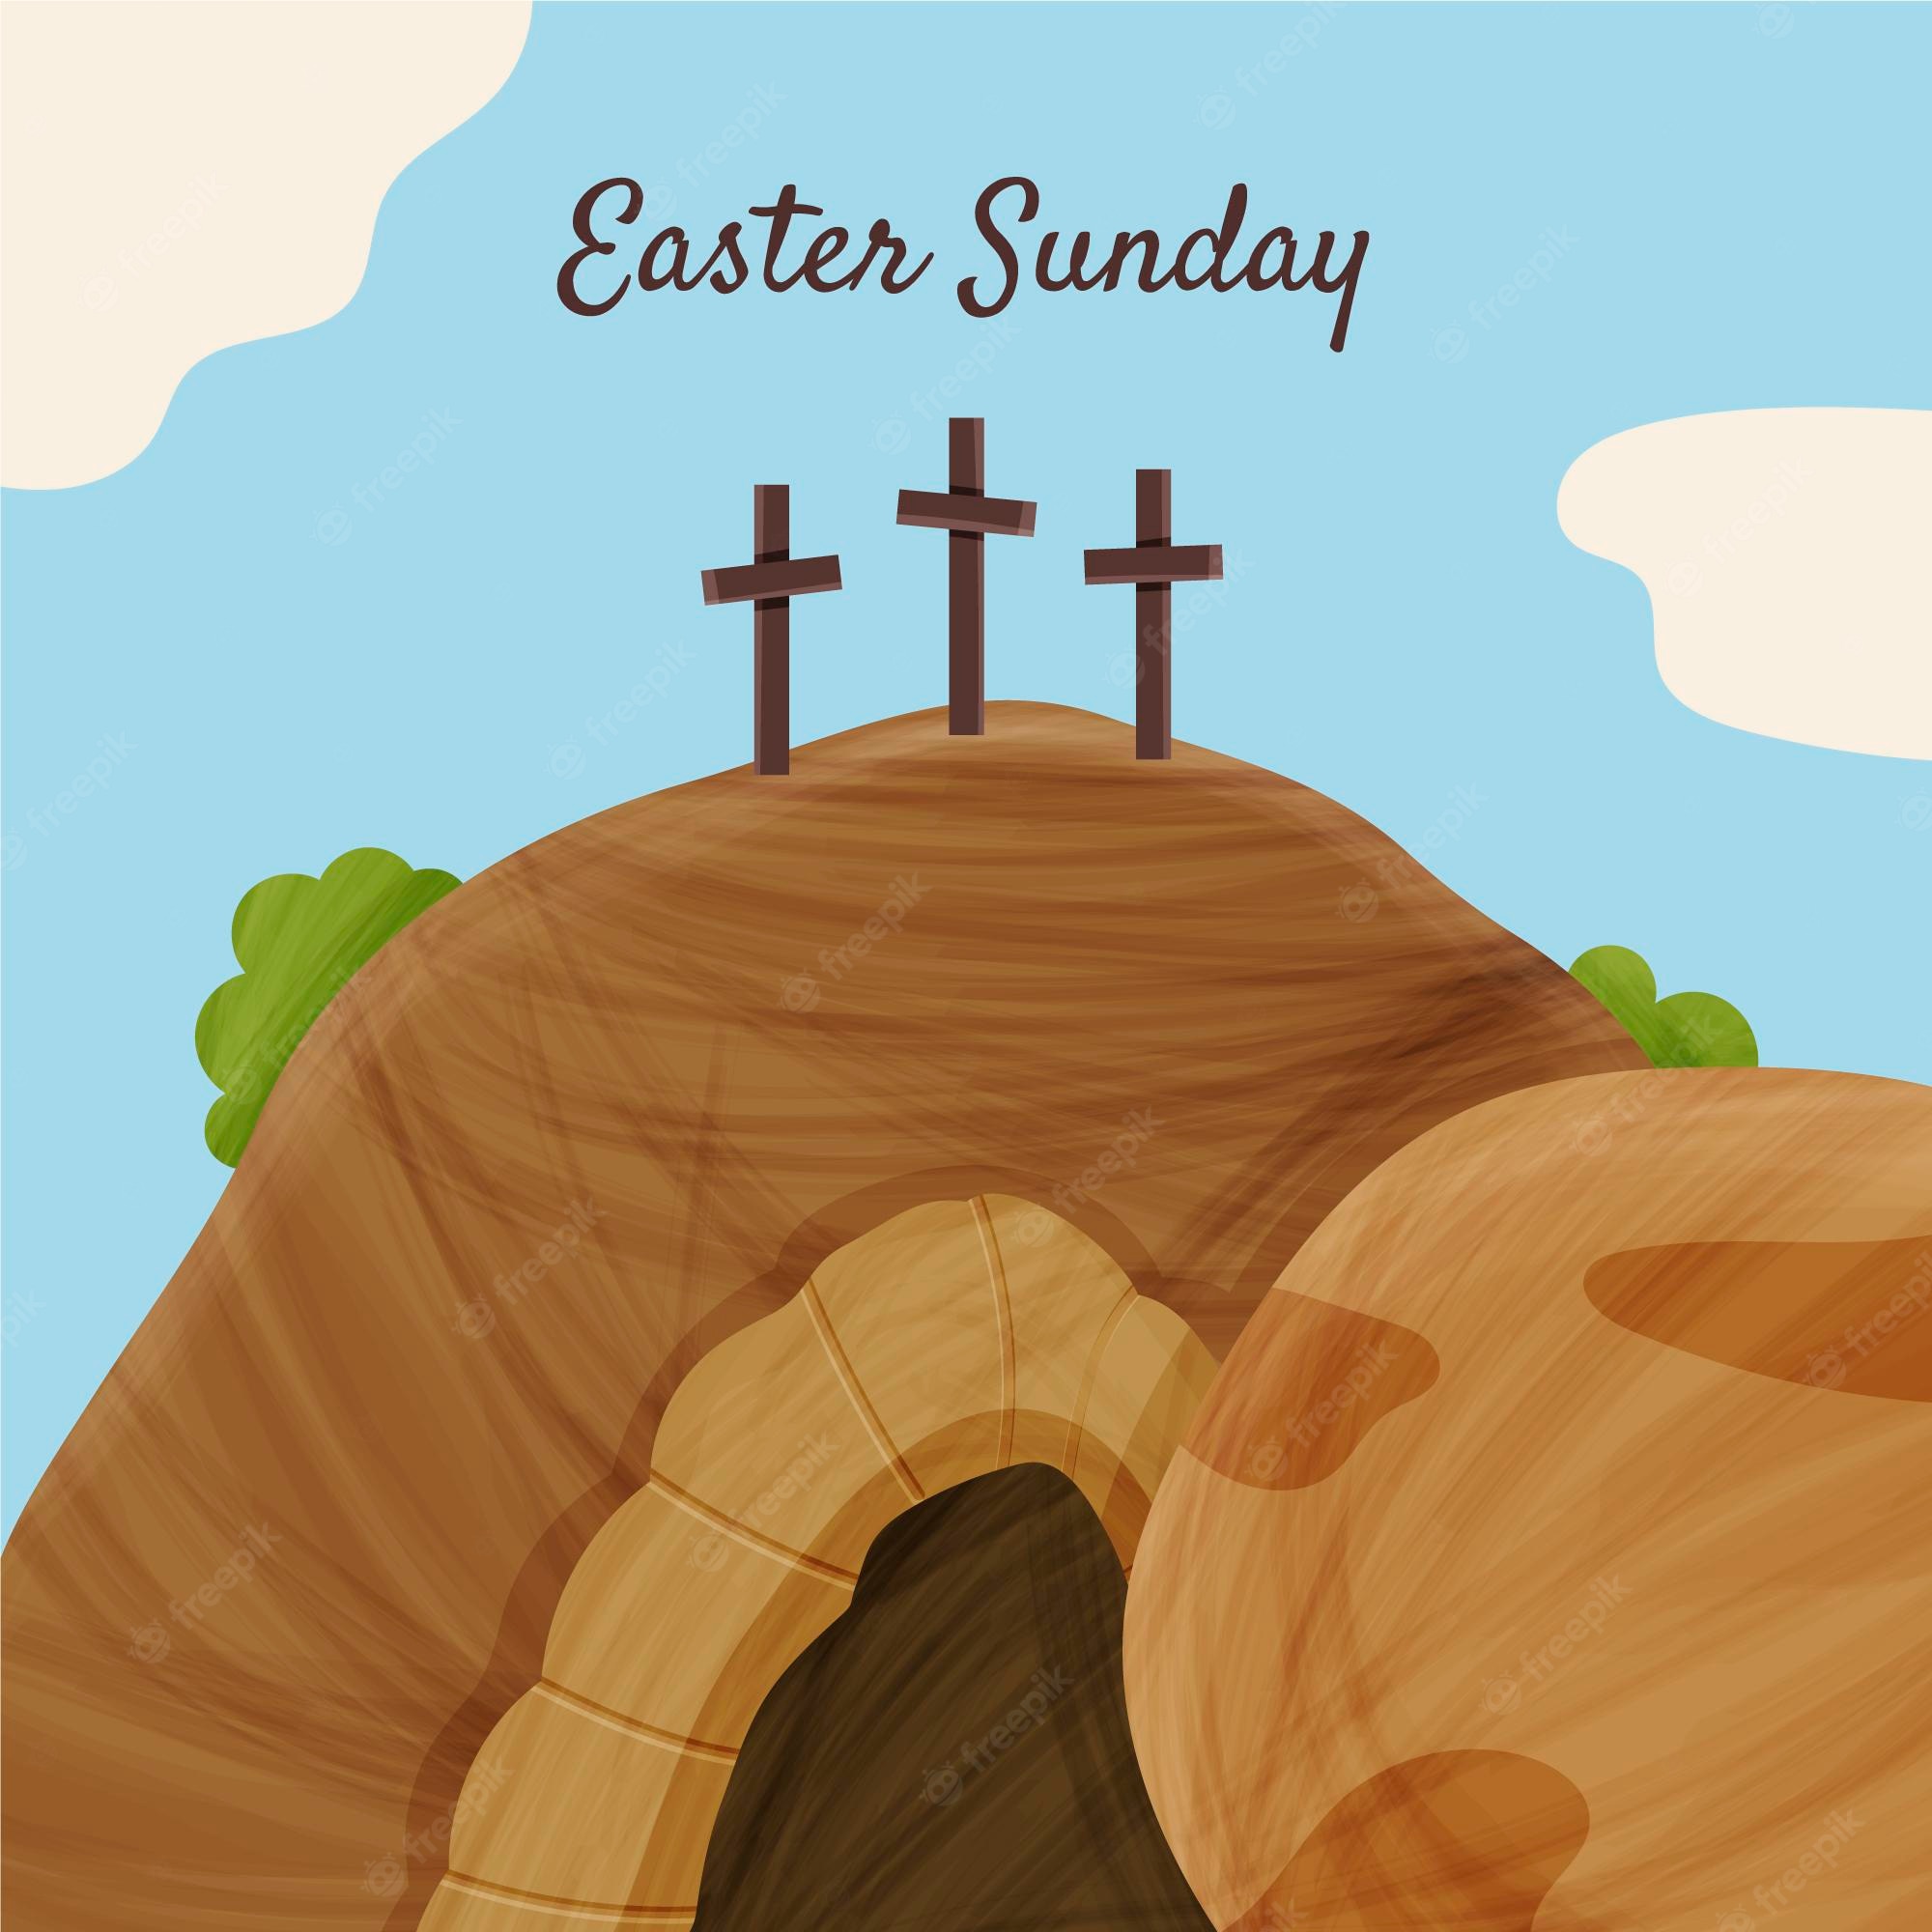 Easter Sunday Clipart for All Your Easter Season Needs ChurchArt